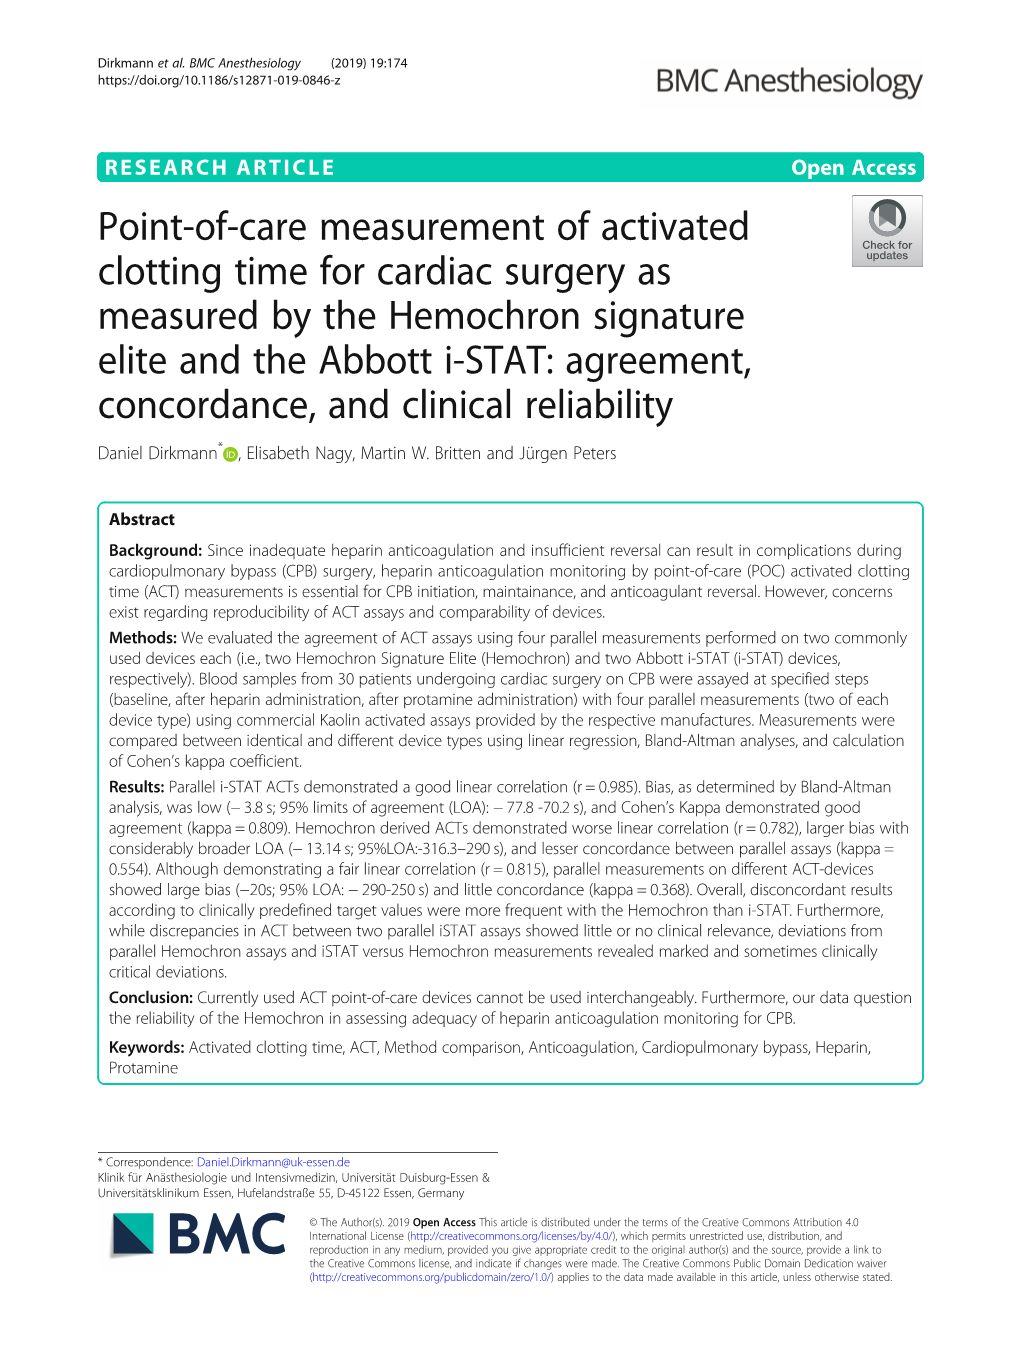 Point-Of-Care Measurement of Activated Clotting Time for Cardiac